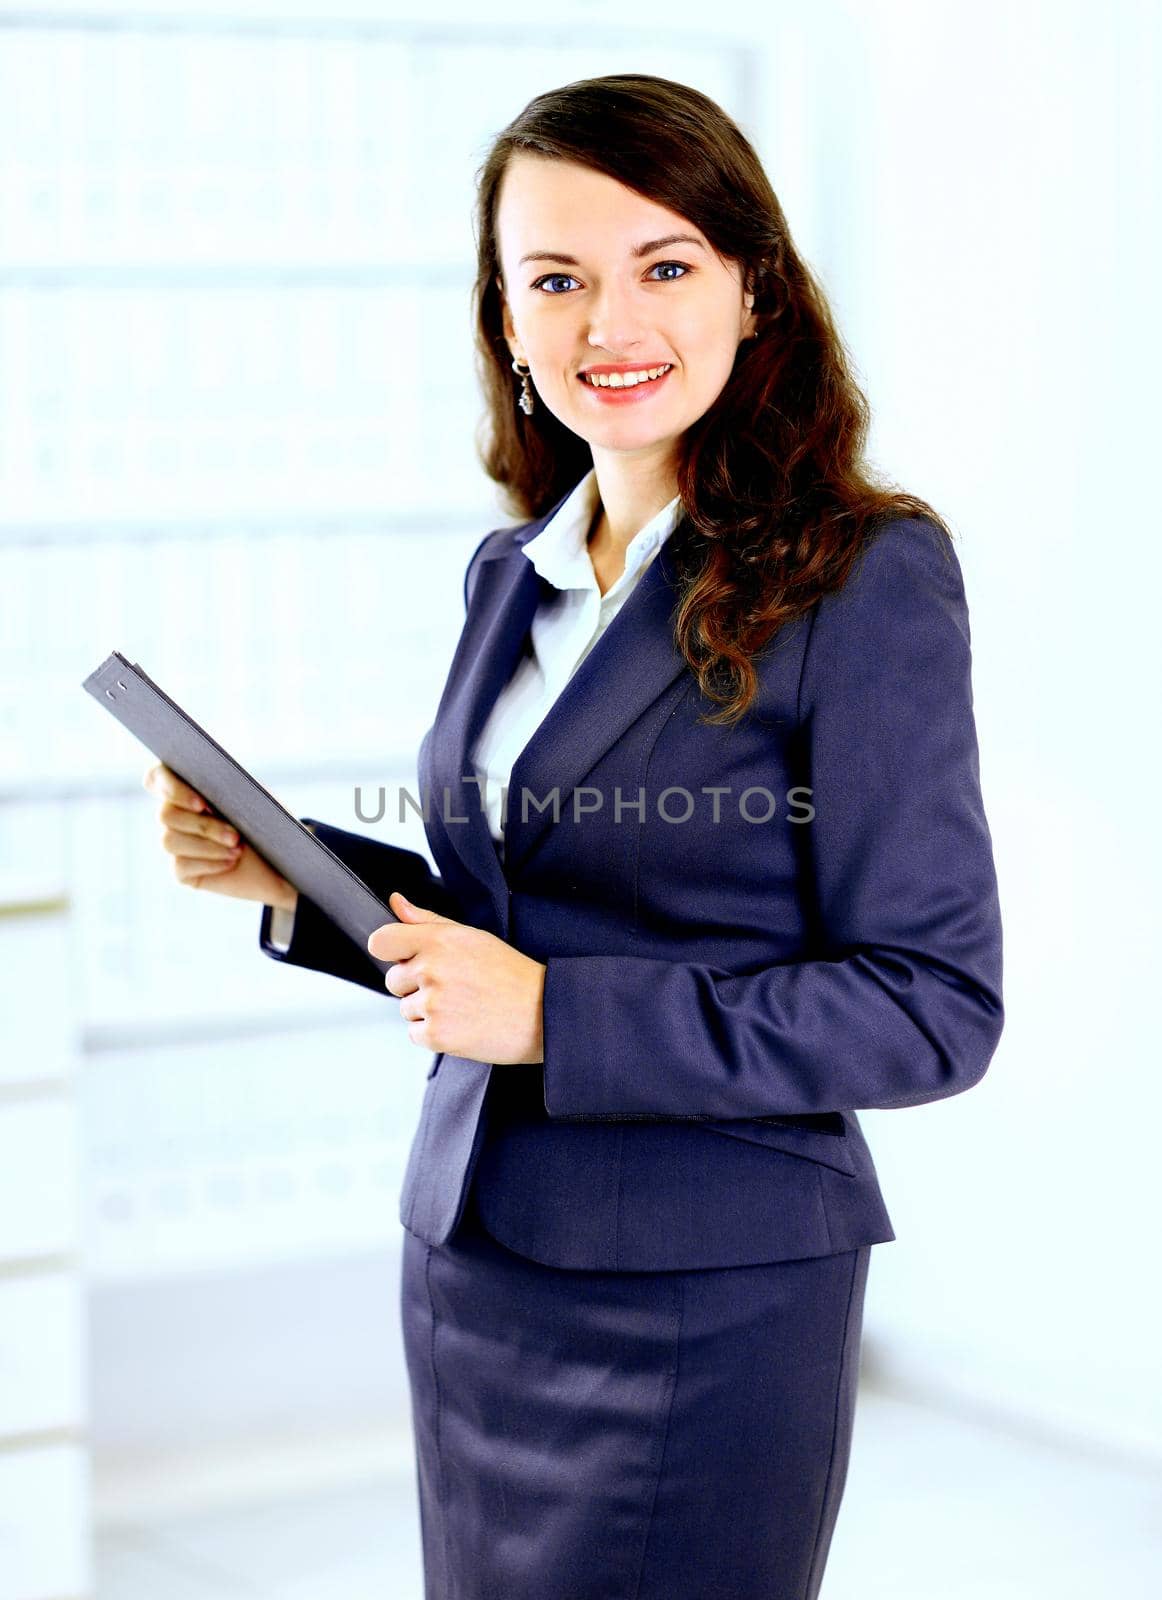 Portrait of a cute young business woman with the work plan smiling, in an office environment.